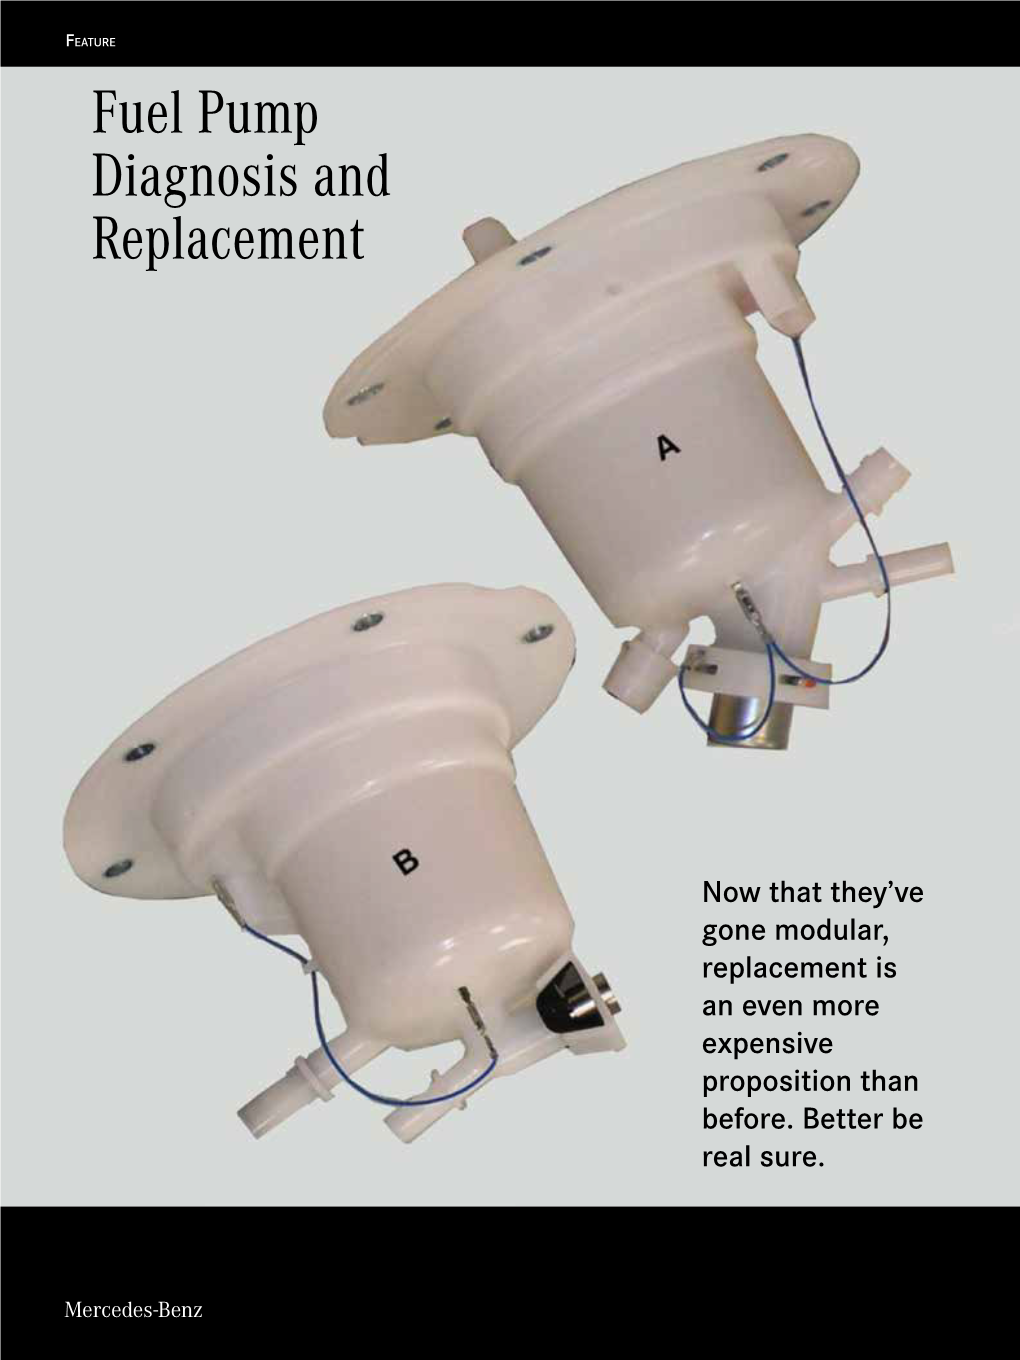 Fuel Pump Diagnosis and Replacement